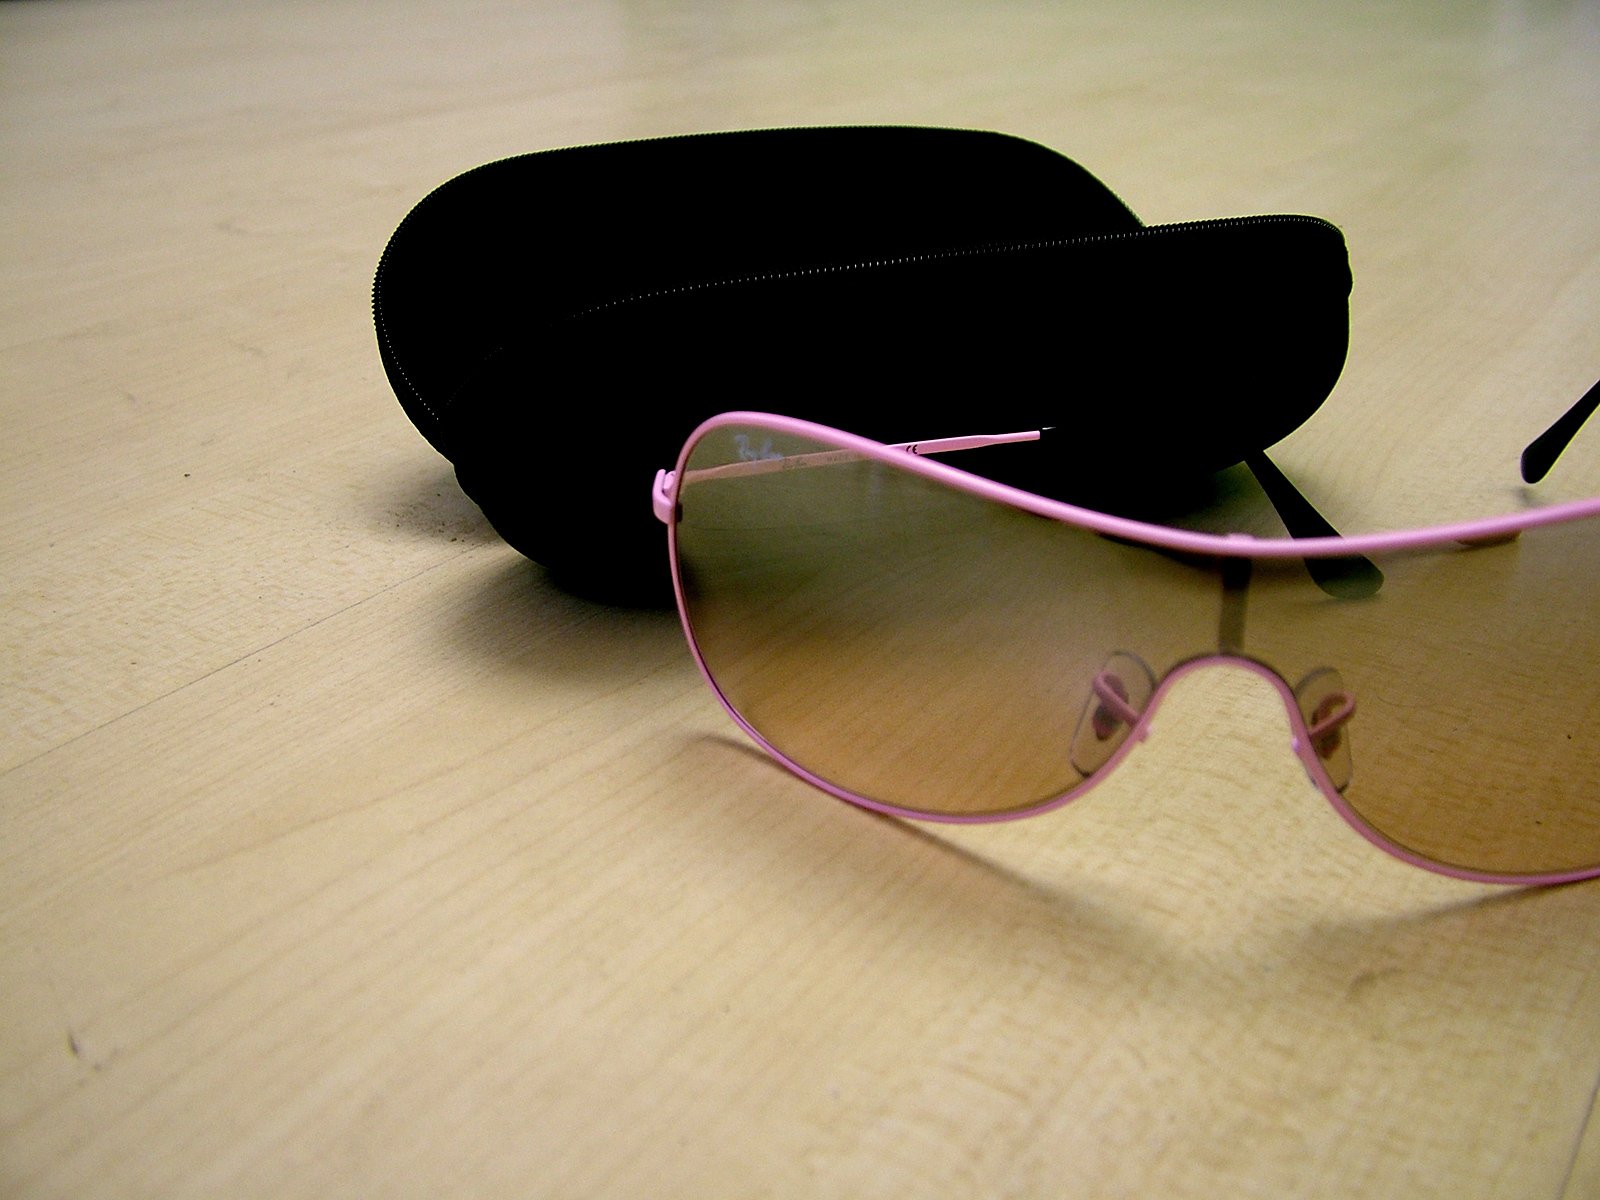 a pair of glasses is laying on a table